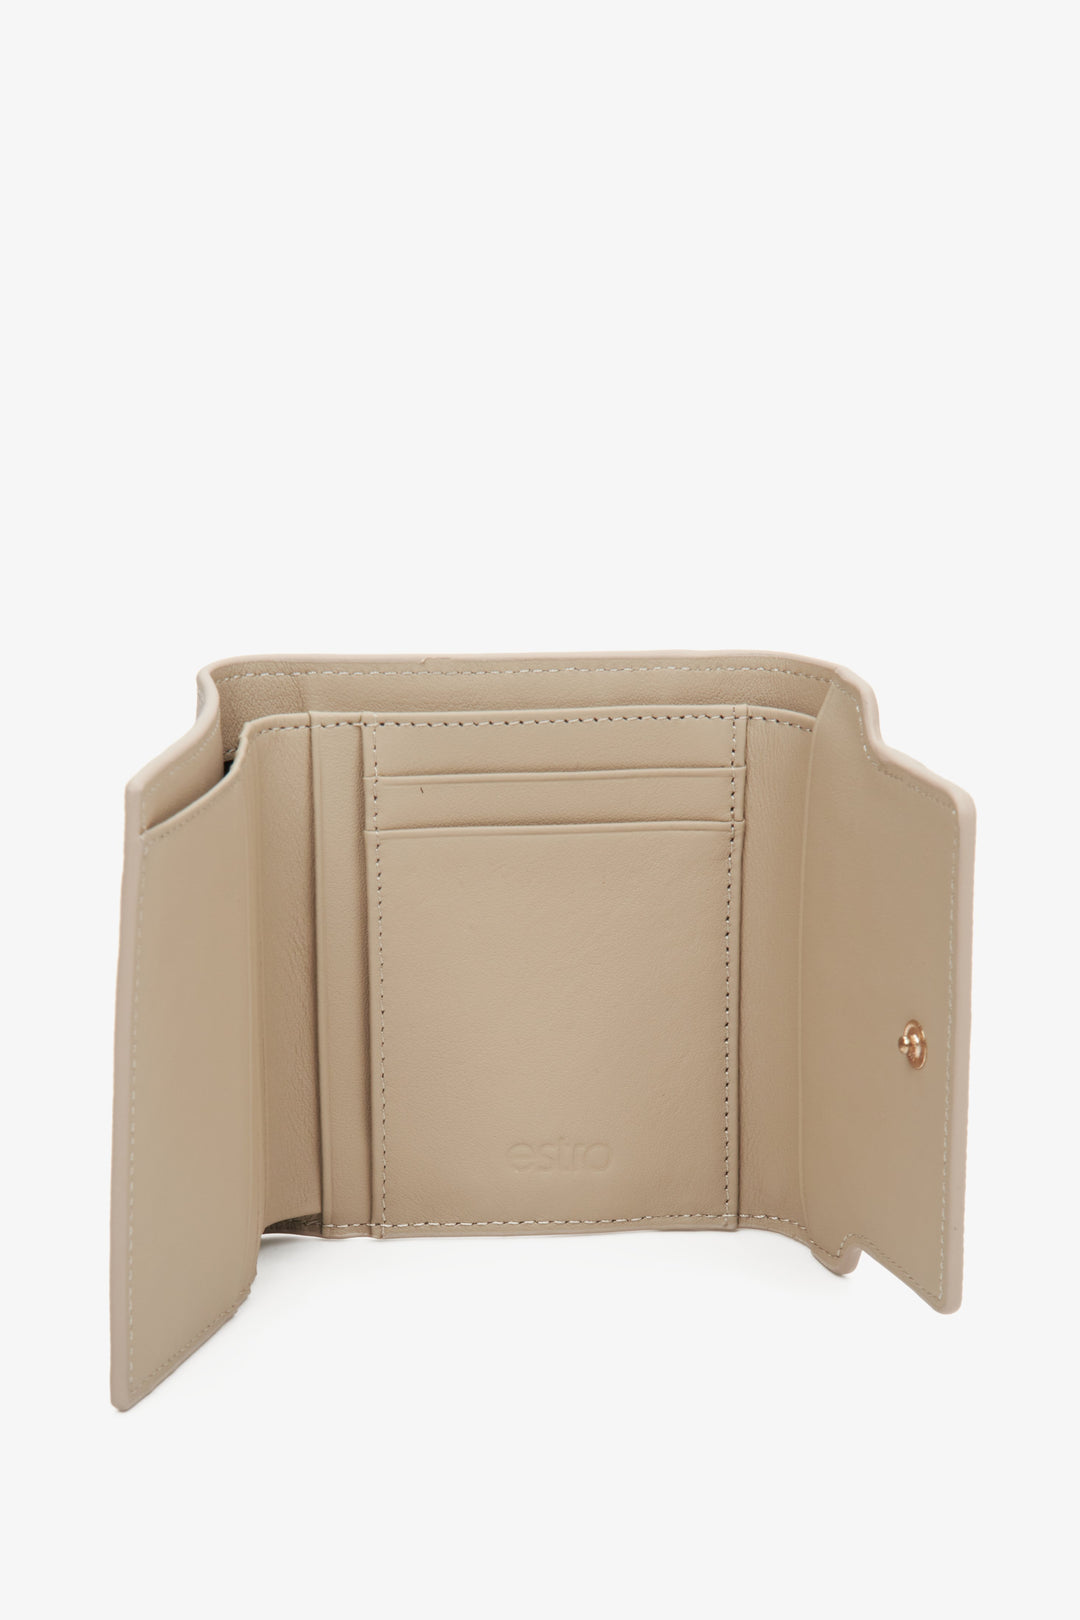 Women's beige leather Estro wallet with a gold clasp - interior design.